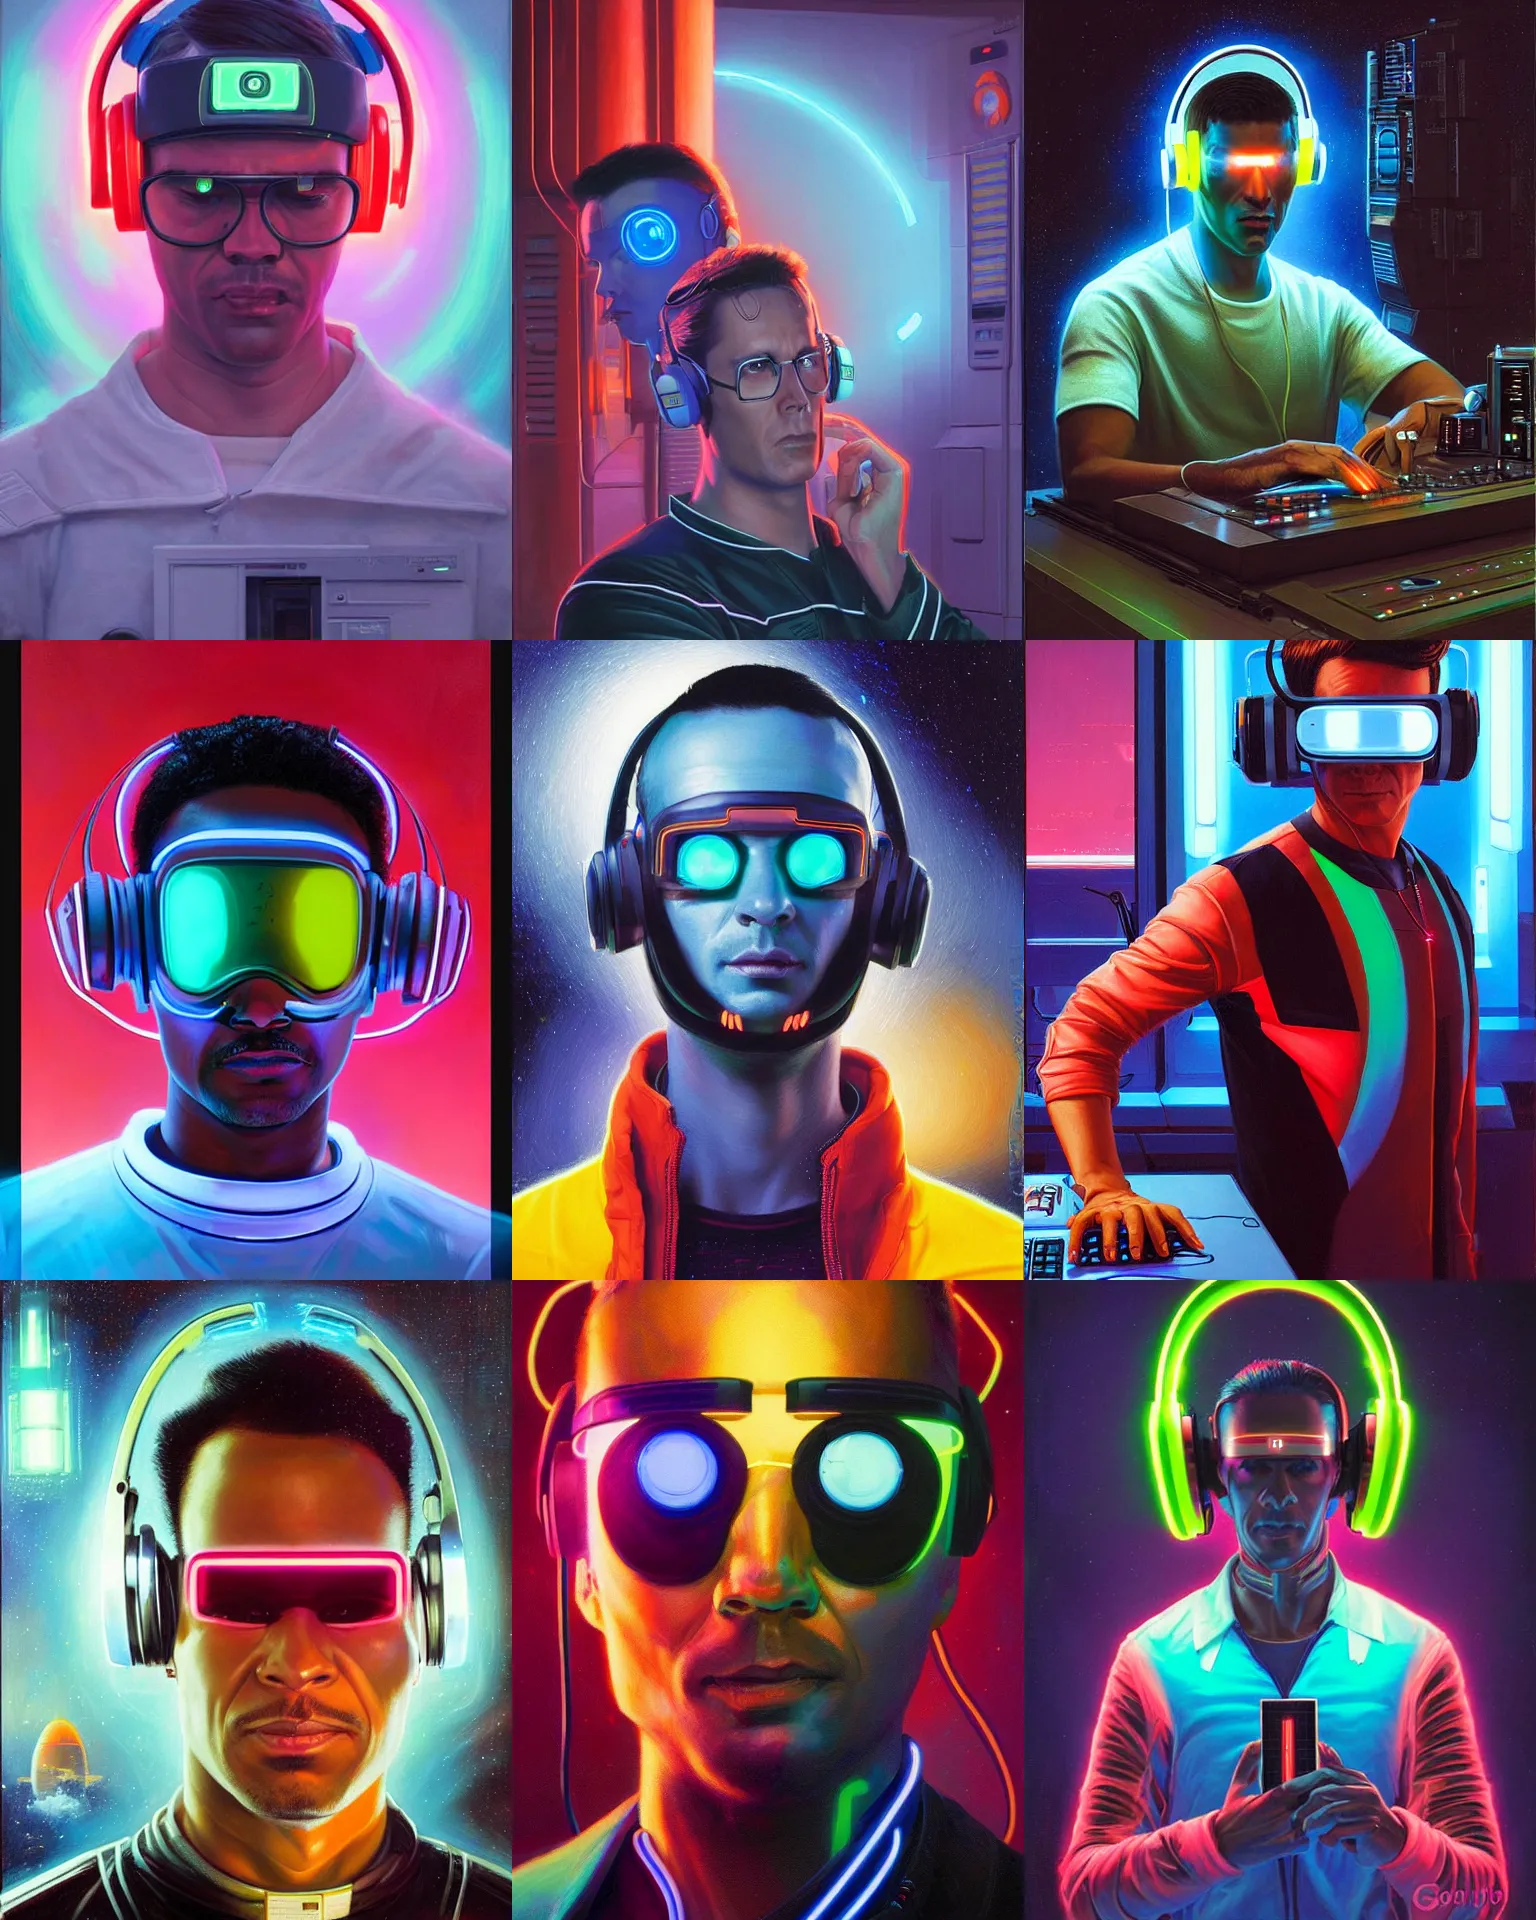 Prompt: neon cyberpunk man working on computer with glowing geordi visor over eyes and sleek headphones headshot desaturated portrait painting by donato giancola, dean cornwall, rhads, tom whalen, conrad roset astronaut fashion photography